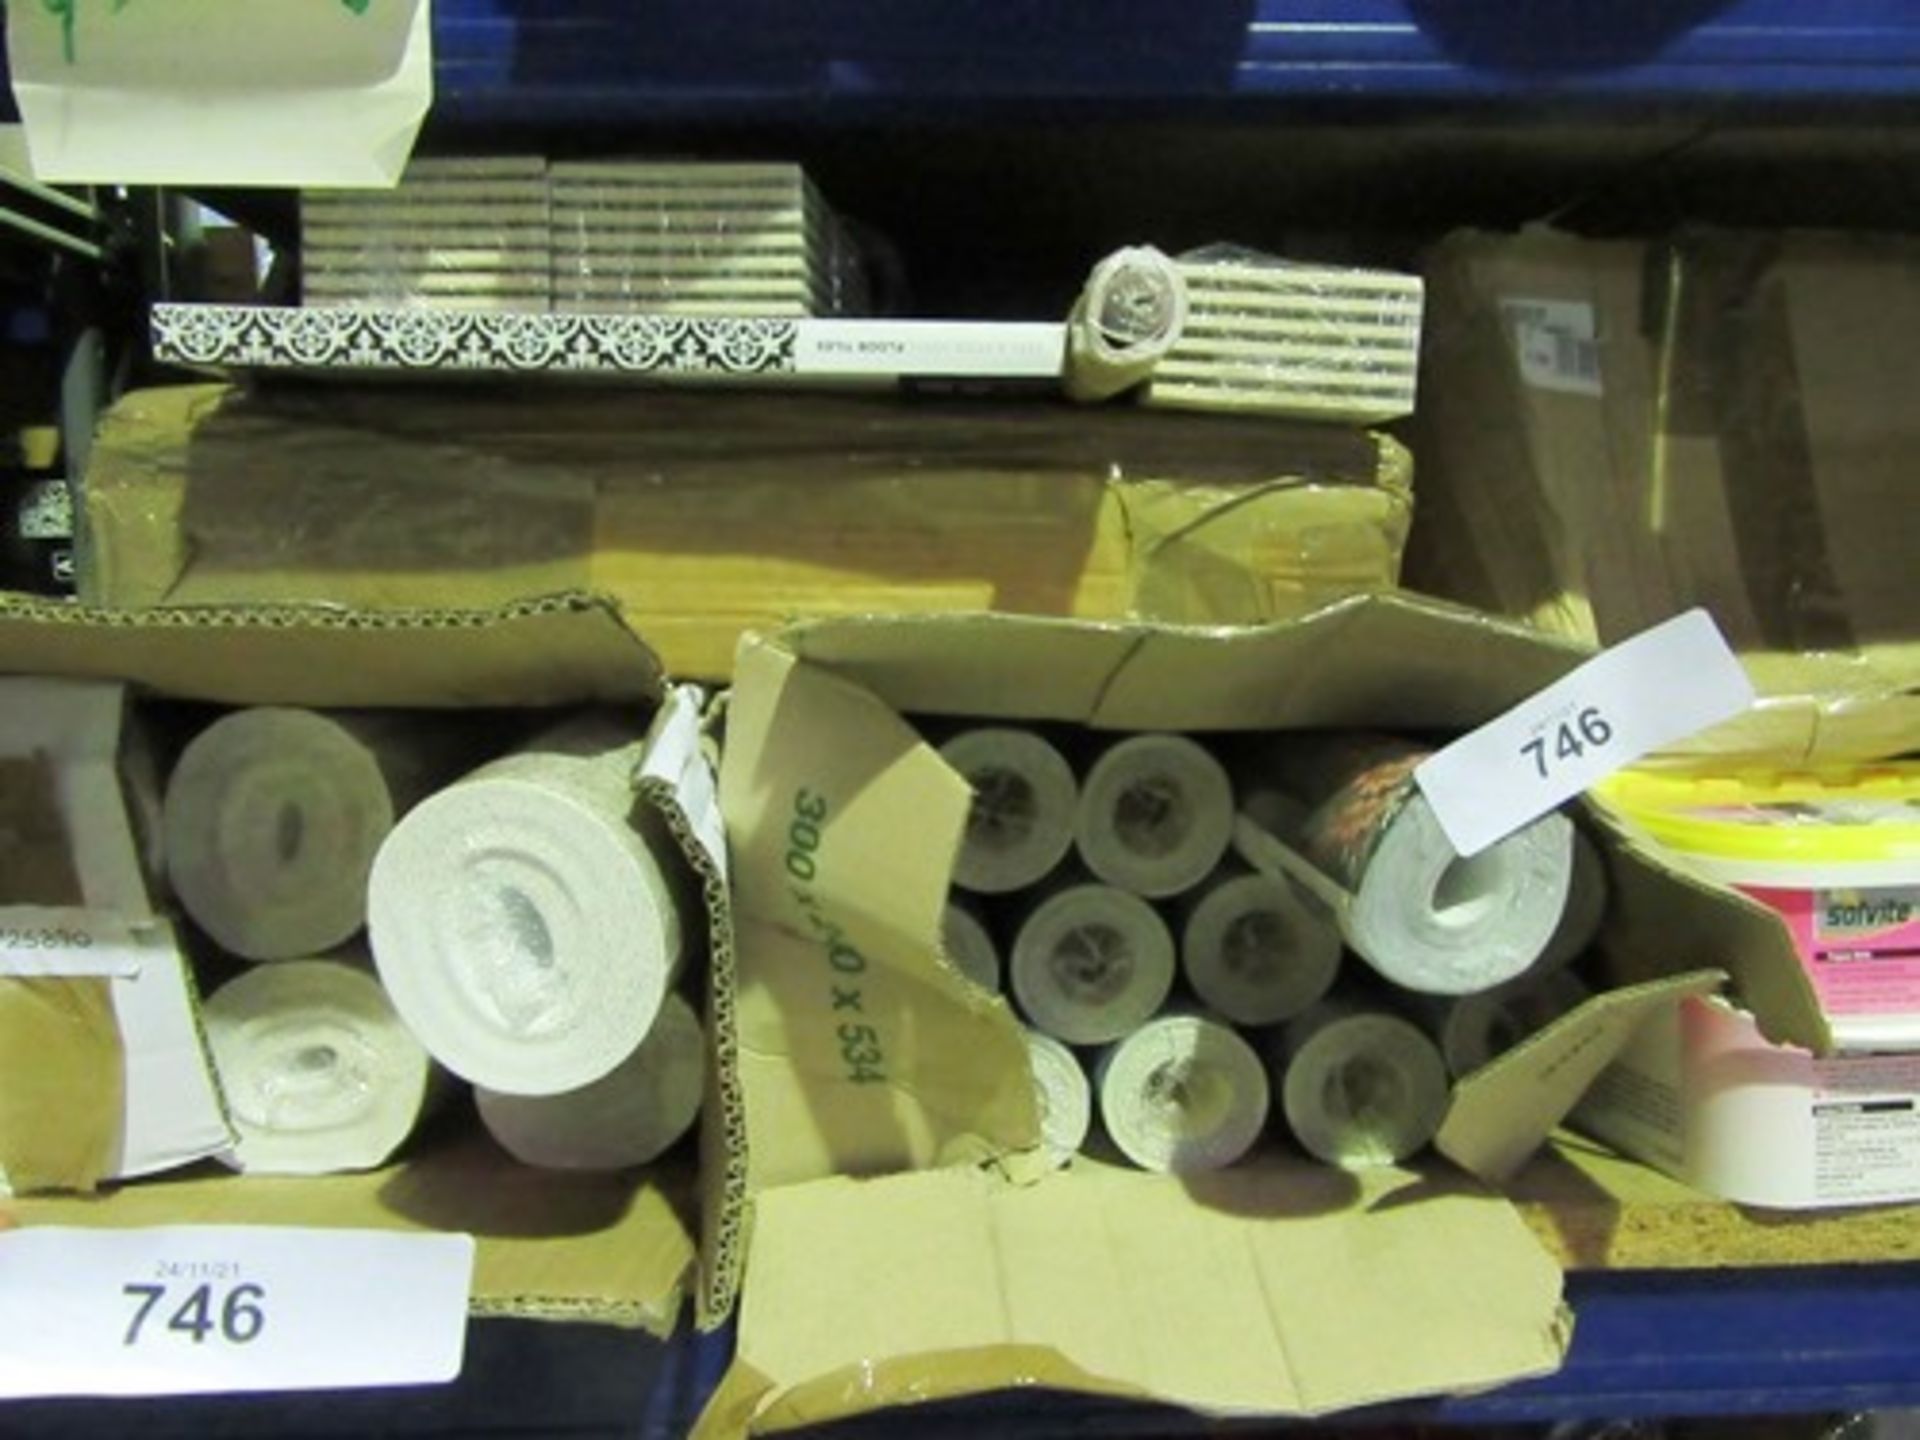 A selection of wallpaper, tiles, stick vinyl tiles, adhesive etc - New (GS26) - Image 2 of 6